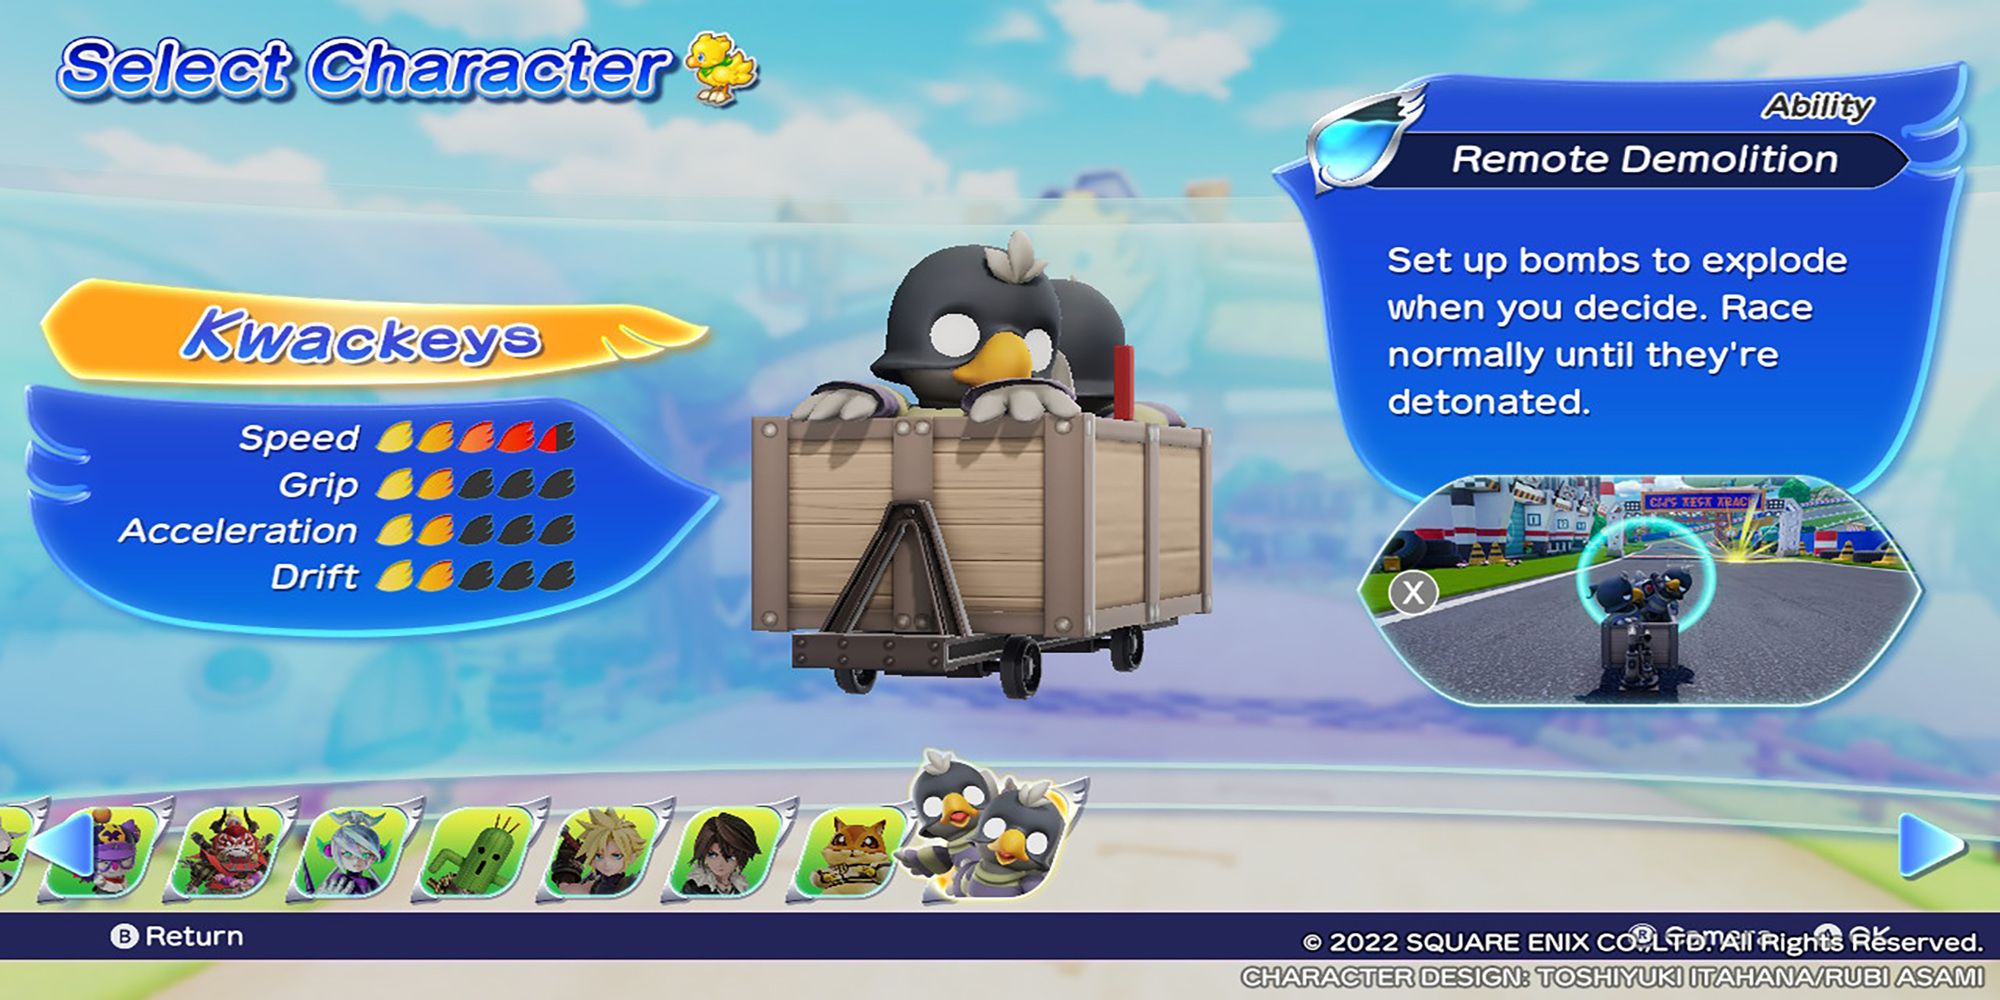 A pair of bomb setting kwackeys sit in a crate-turned-racecar on the Character Select Screen in Chocobo GP.